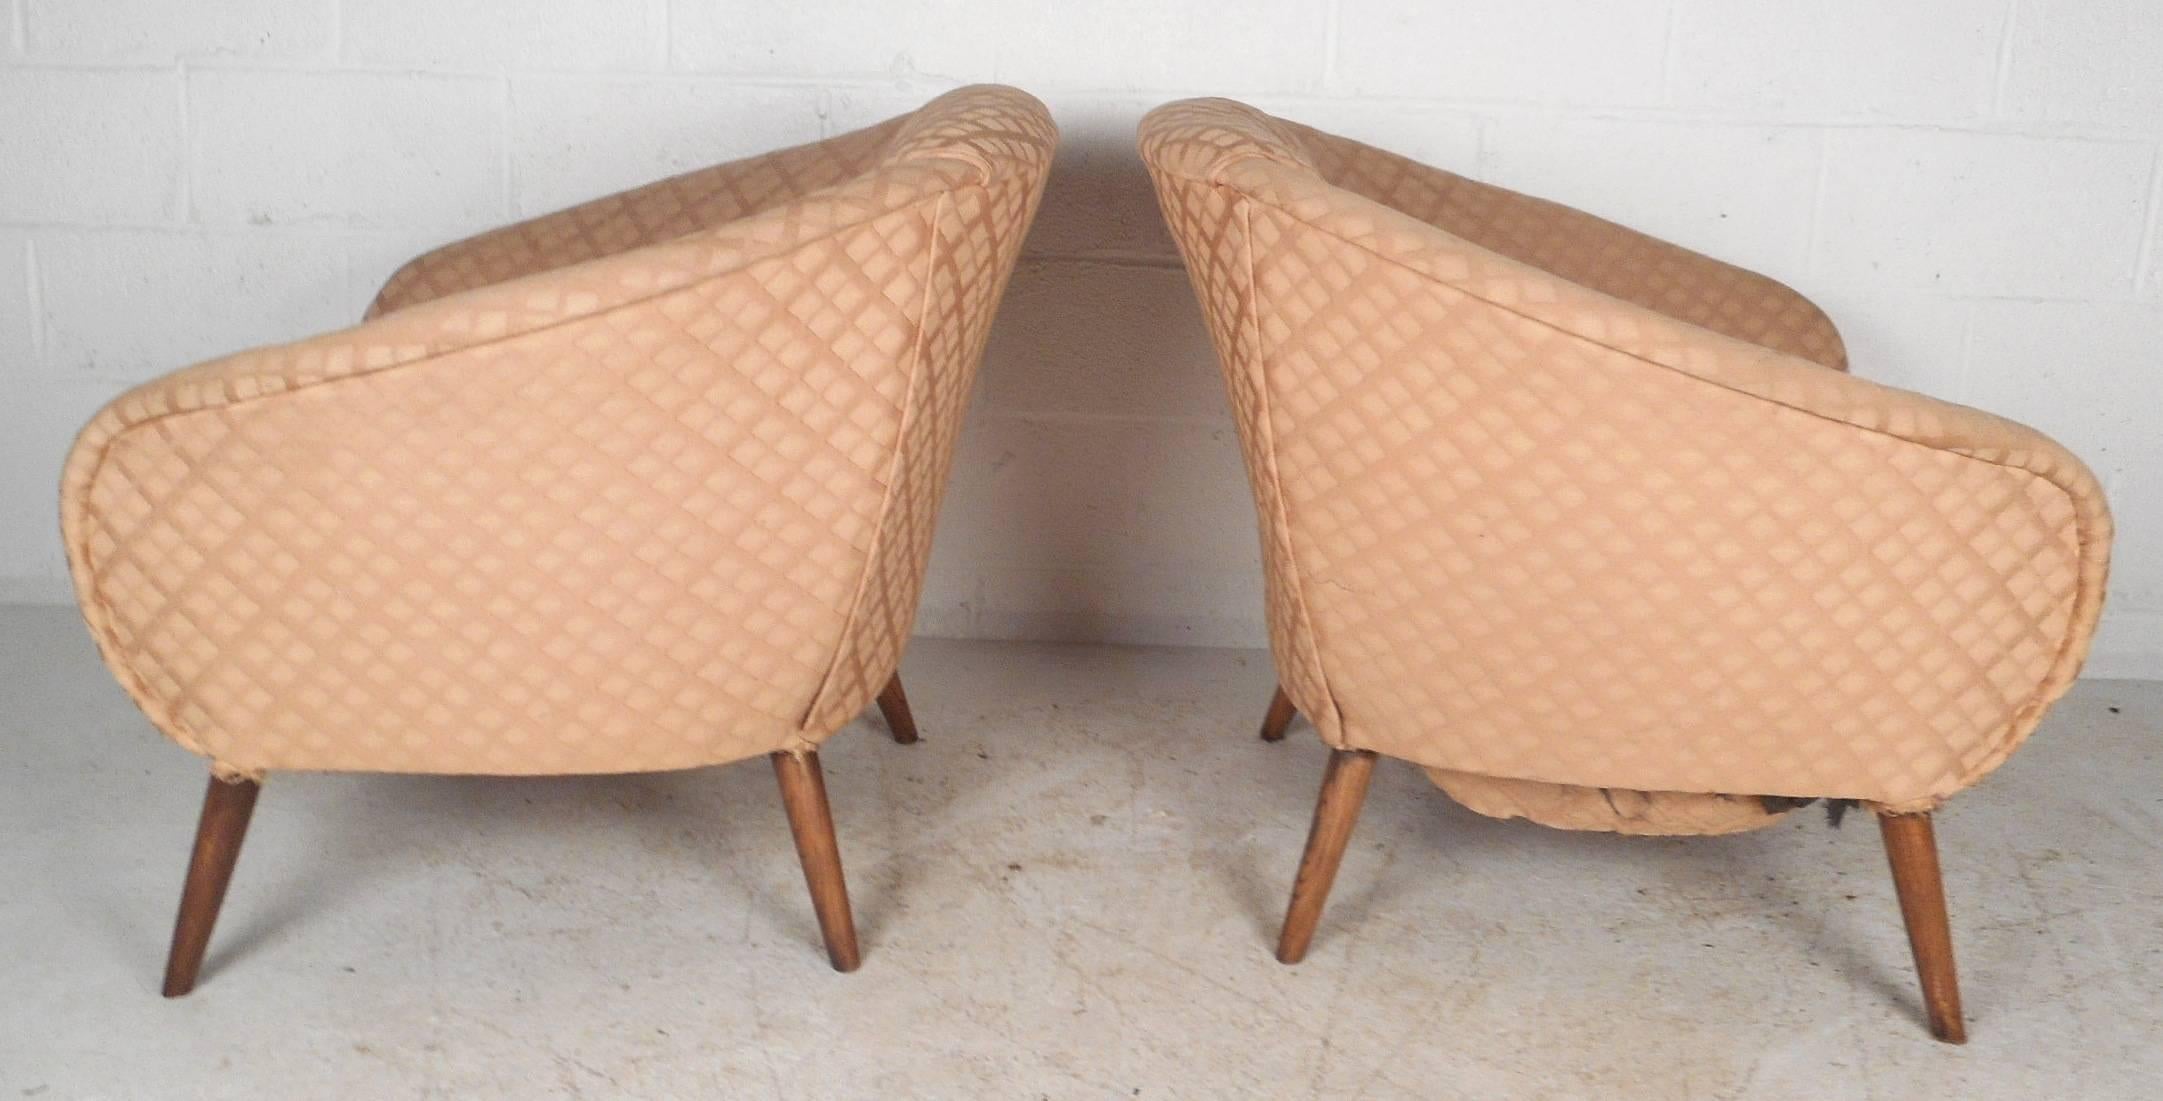 Late 20th Century Mid-Century Modern Barrel Back Tufted Lounge Chairs